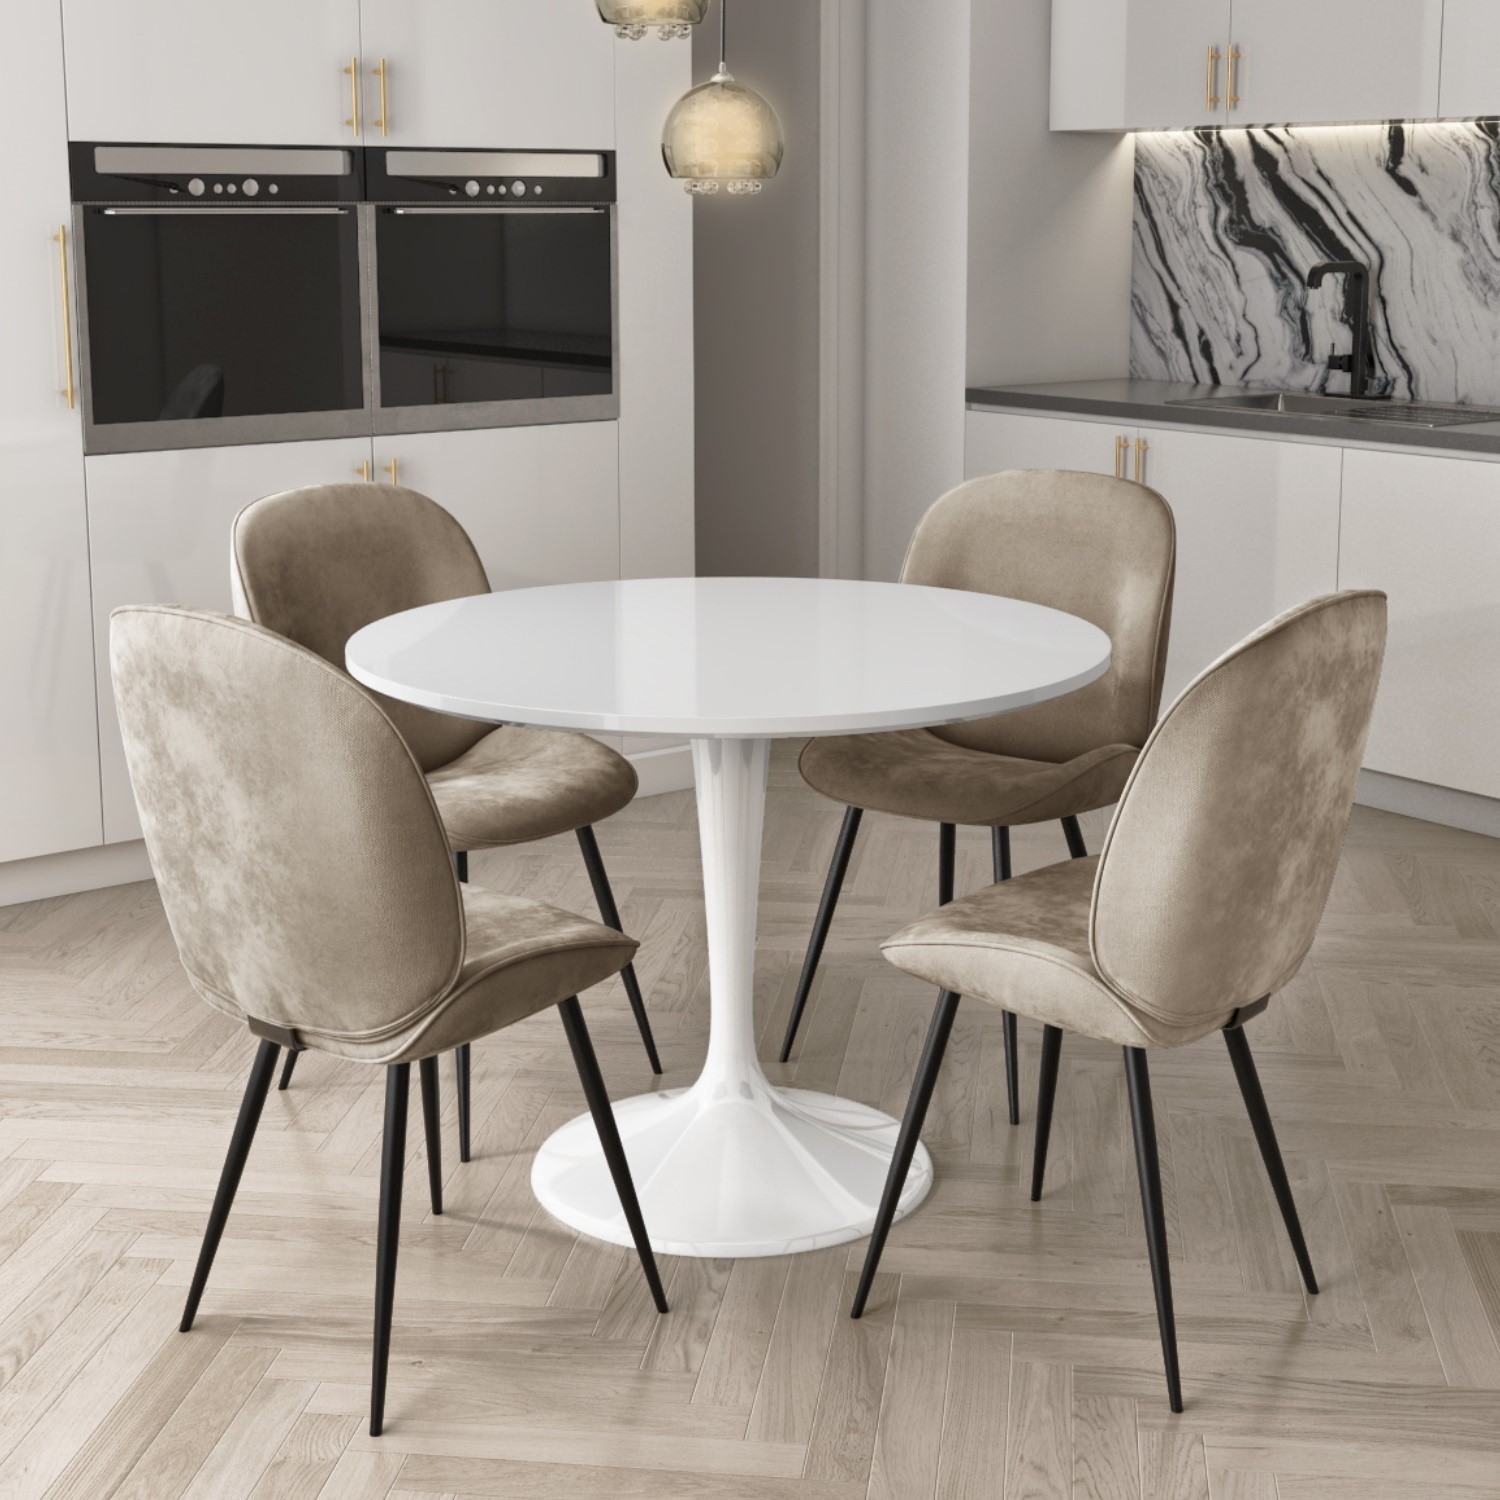 White Round High Gloss Dining Table, White Circle Dining Table And Chairs